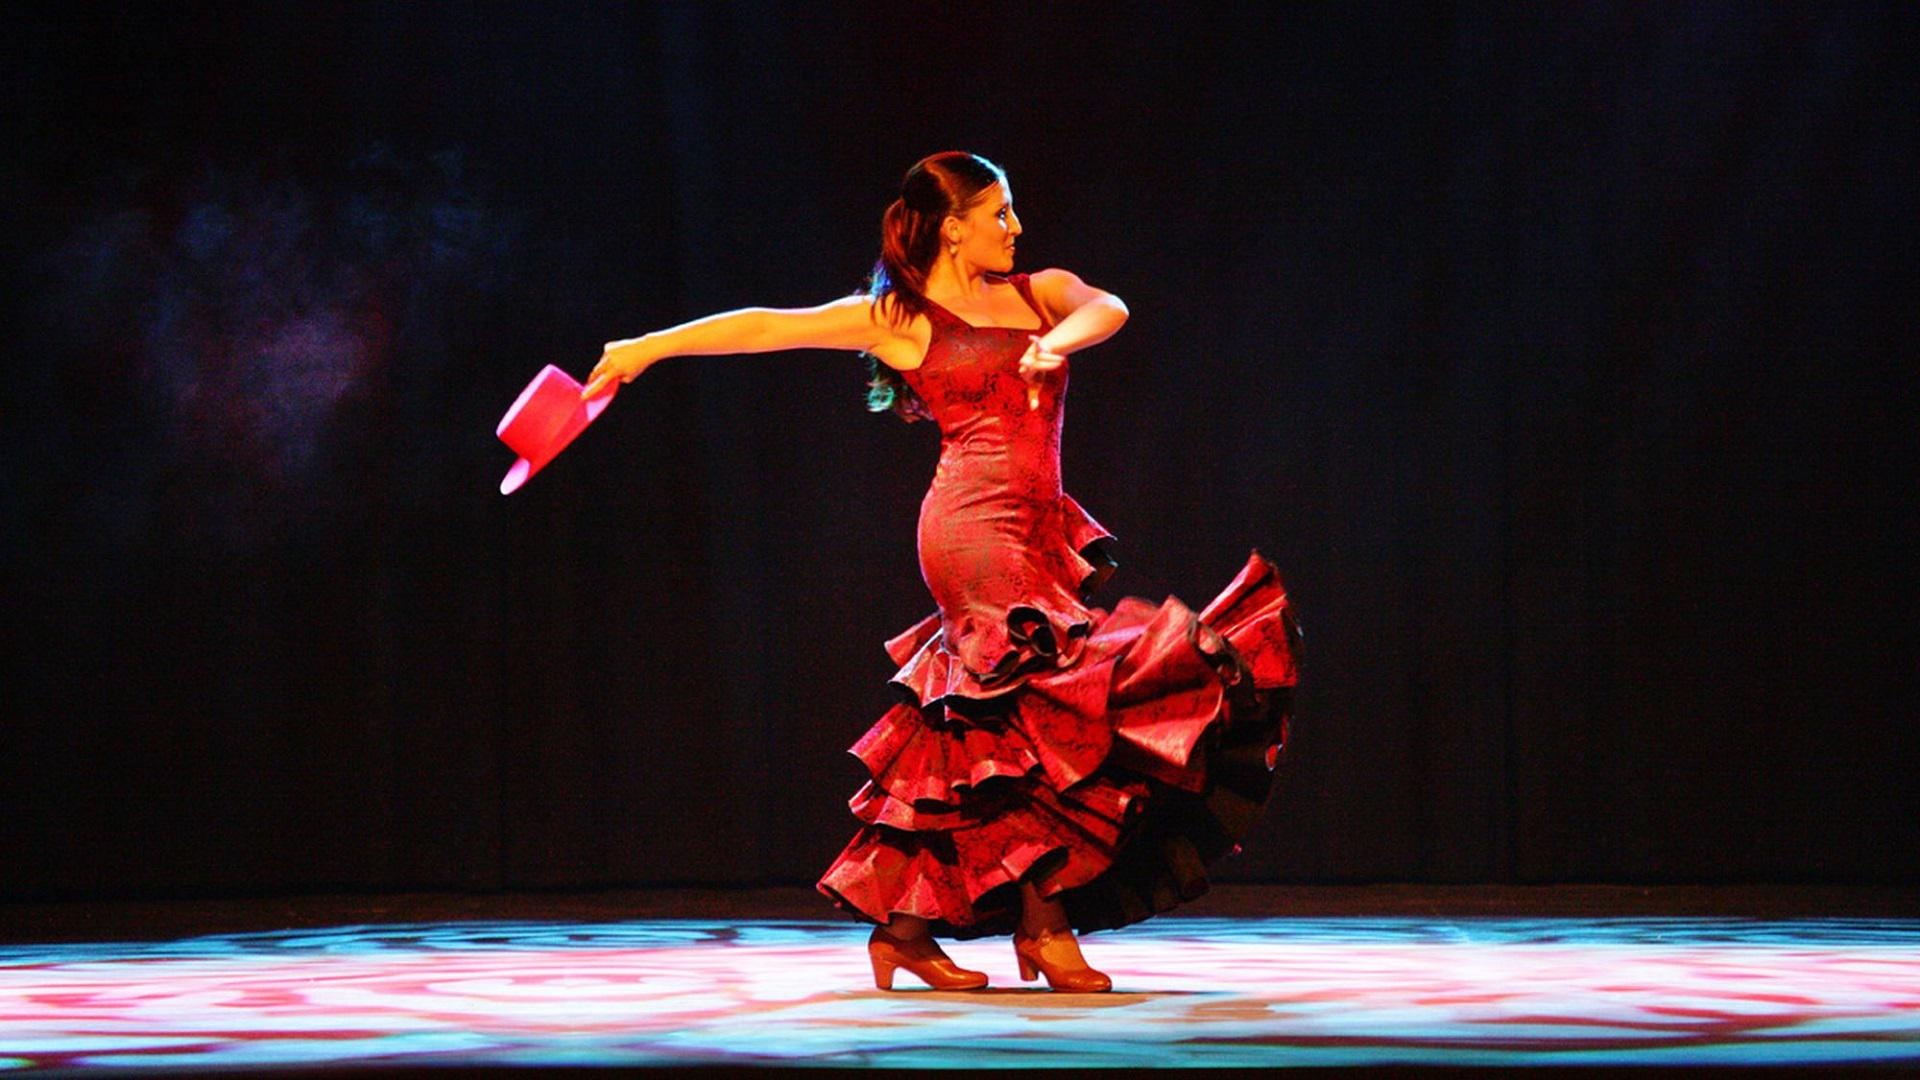 Flamenco: Sweeping arm movements, A traditional red dress with layers of ruffles on the skirt. 1920x1080 Full HD Wallpaper.